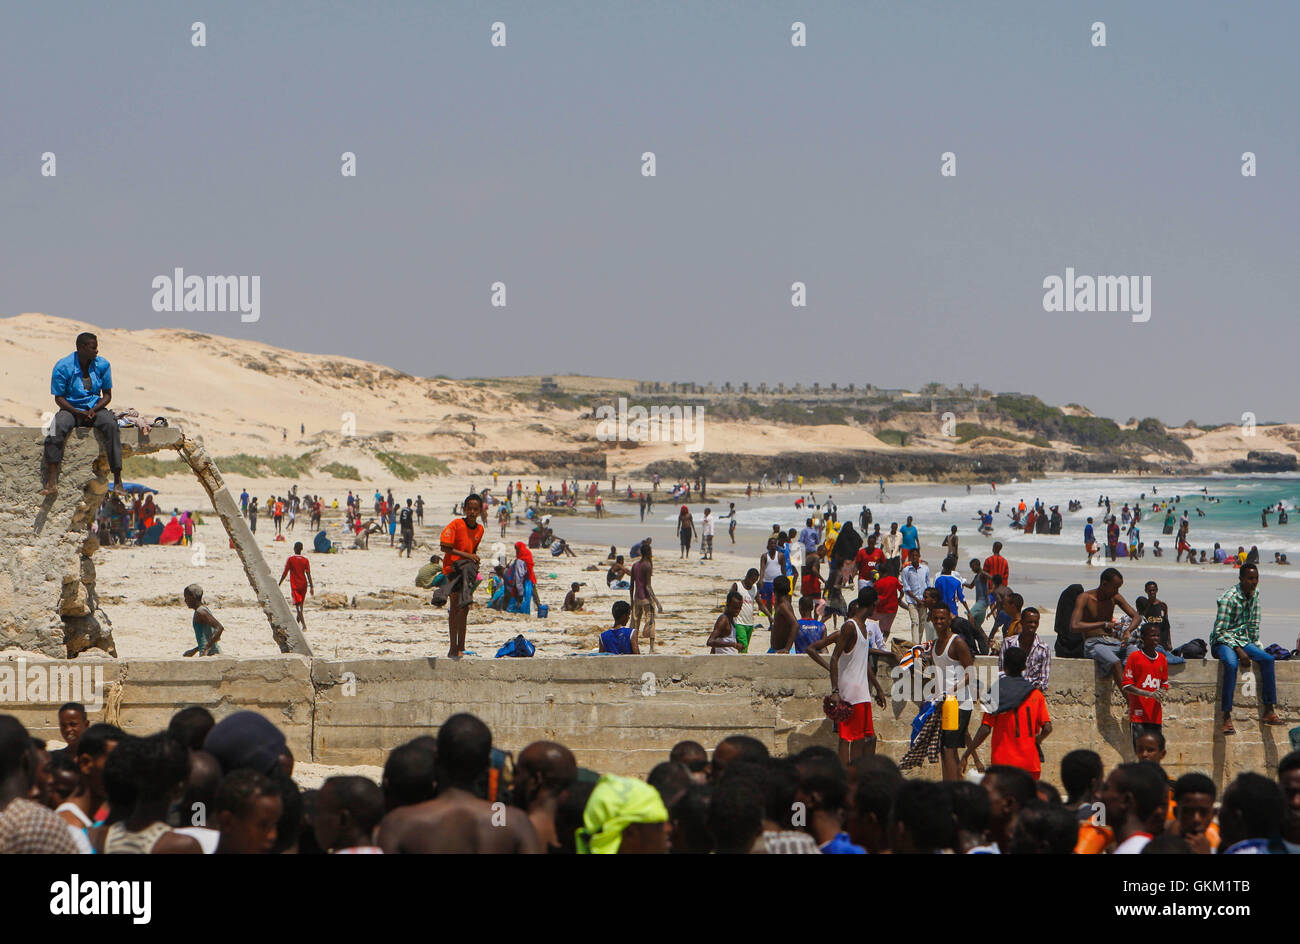 Somalia Mogadishu In A Photo Taken 09 November And Released By The